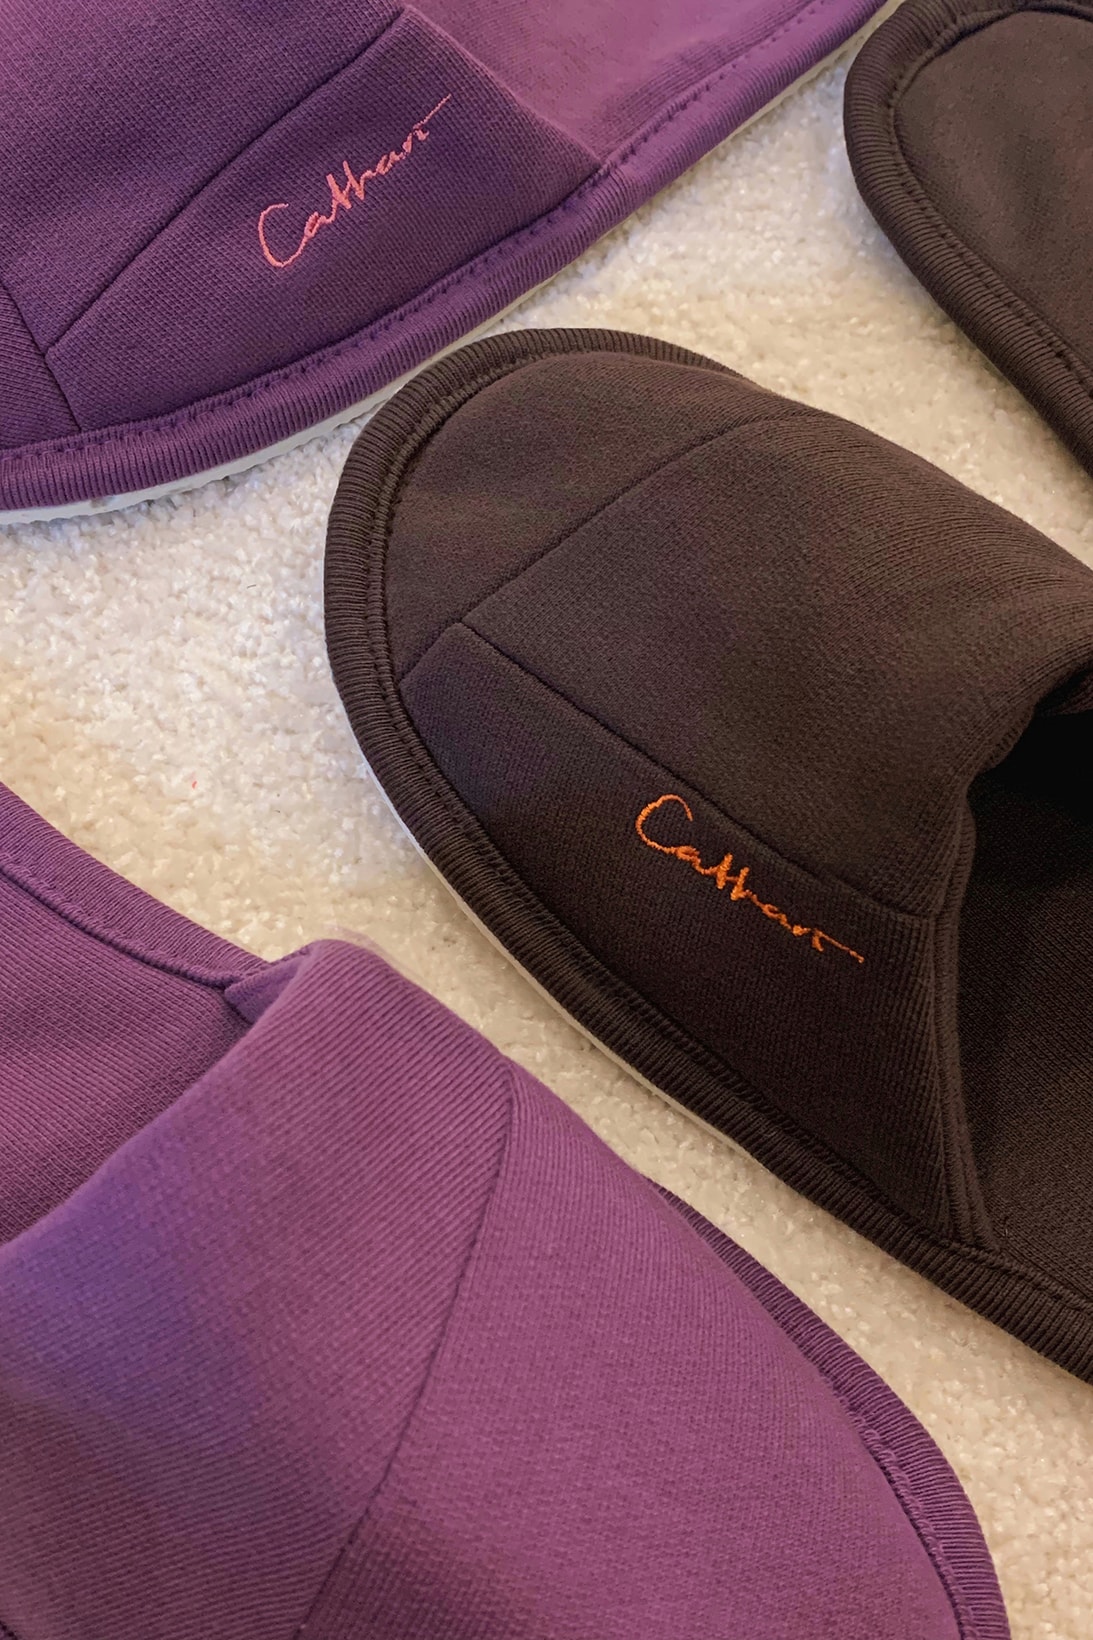 danielle cathari upcycled home slippers sustainability brown purple footwear shoes